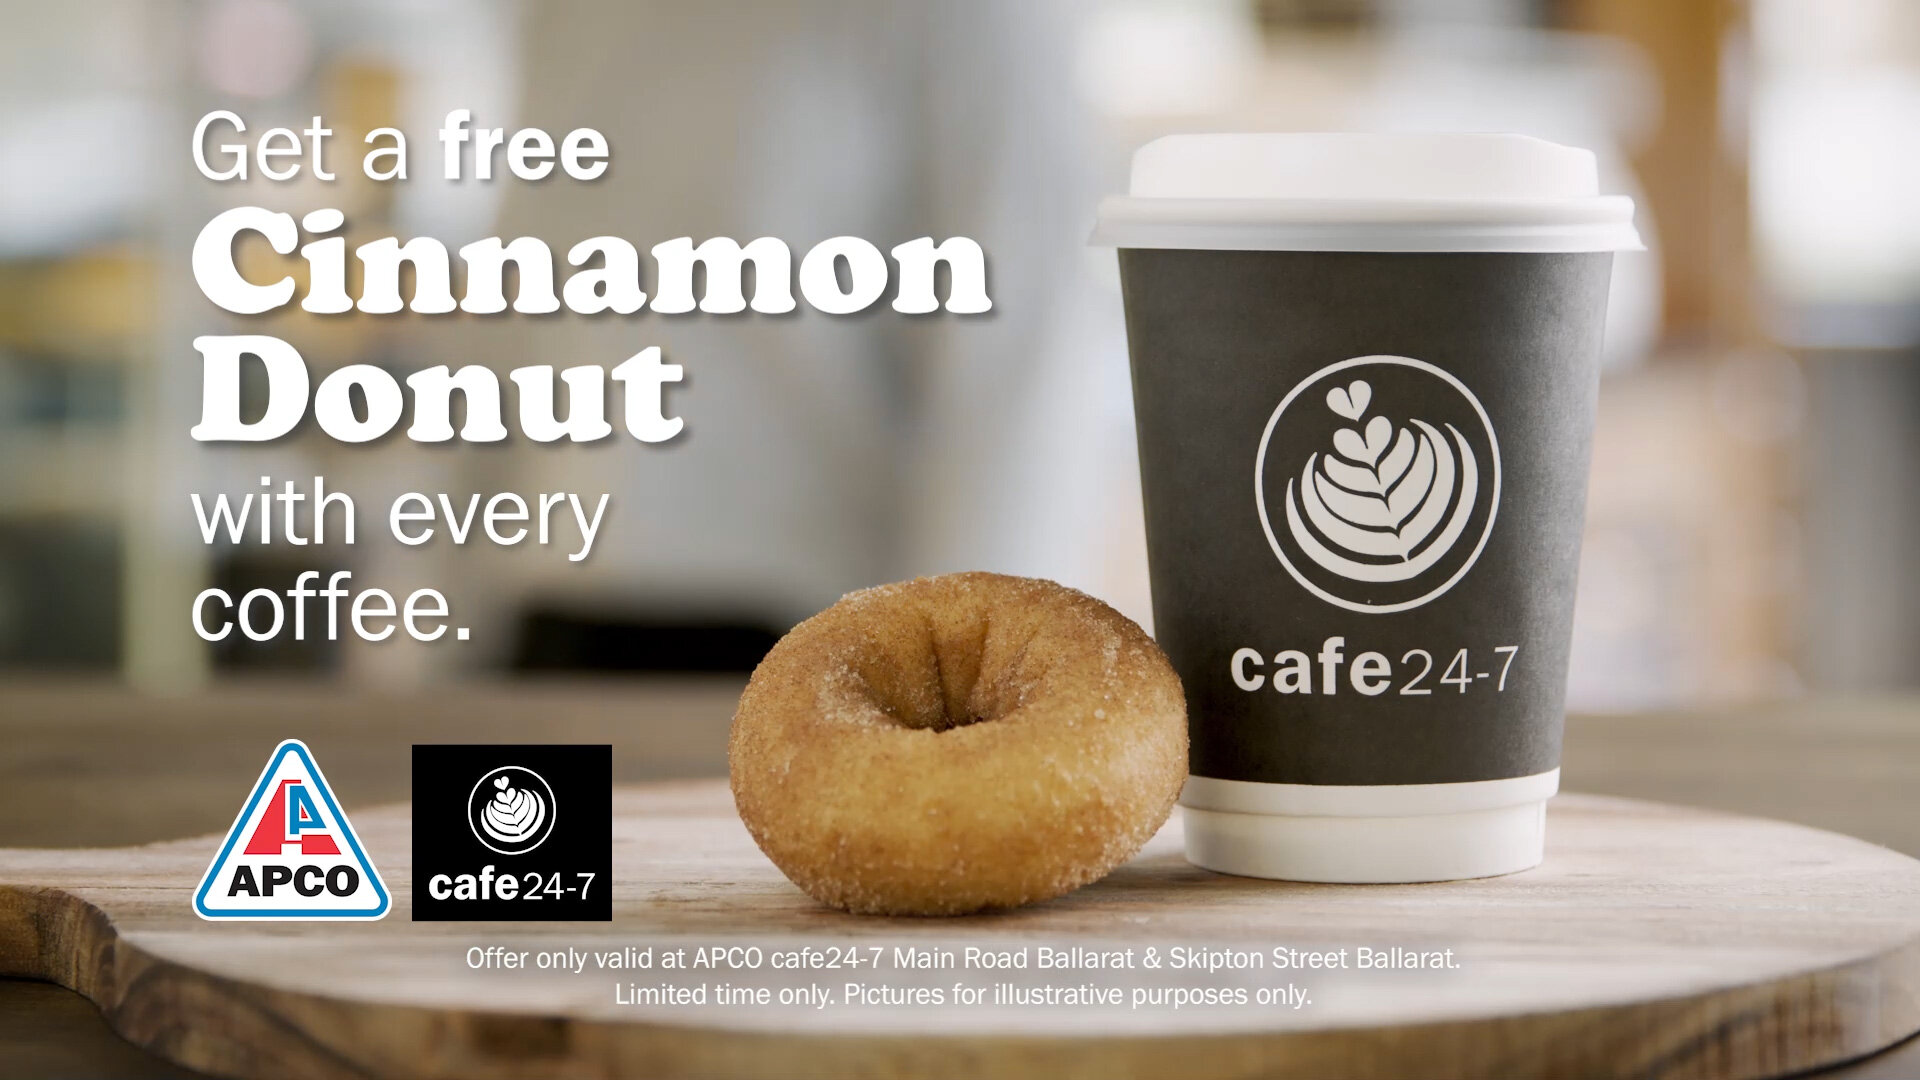 cafe24-7 - Free Donut Campaign